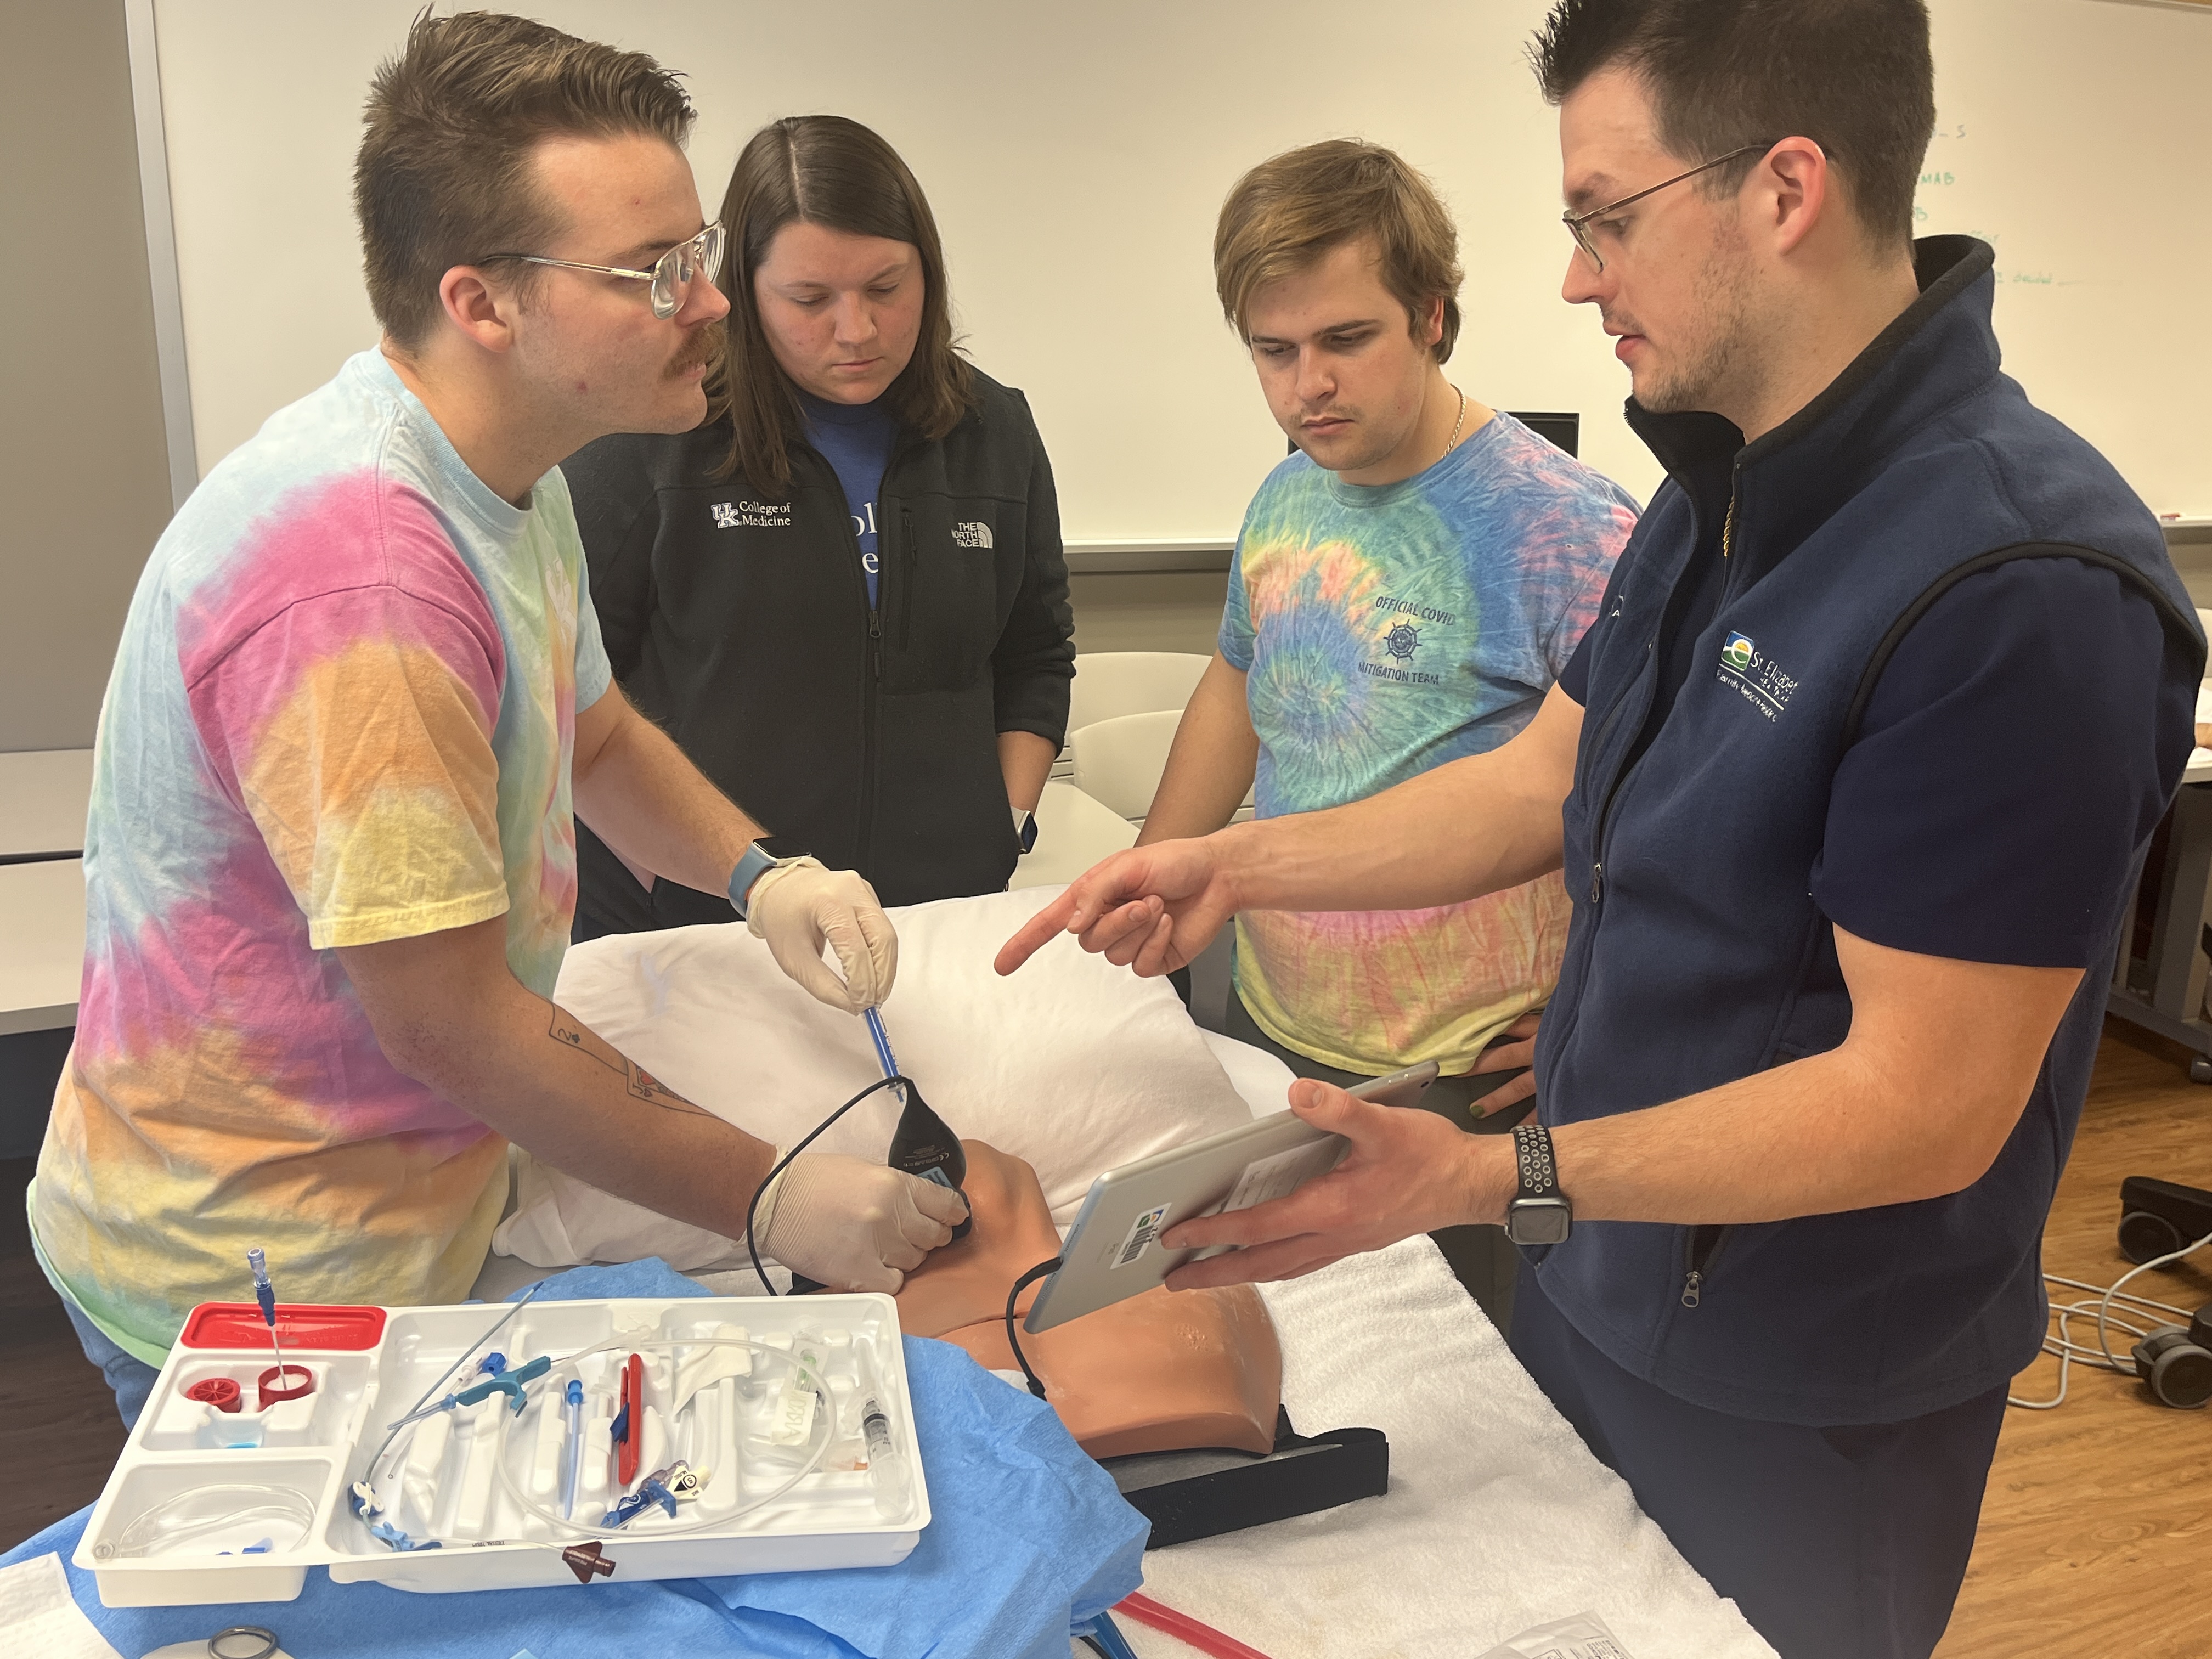 medical students receiving instruction from residents over a mannequin